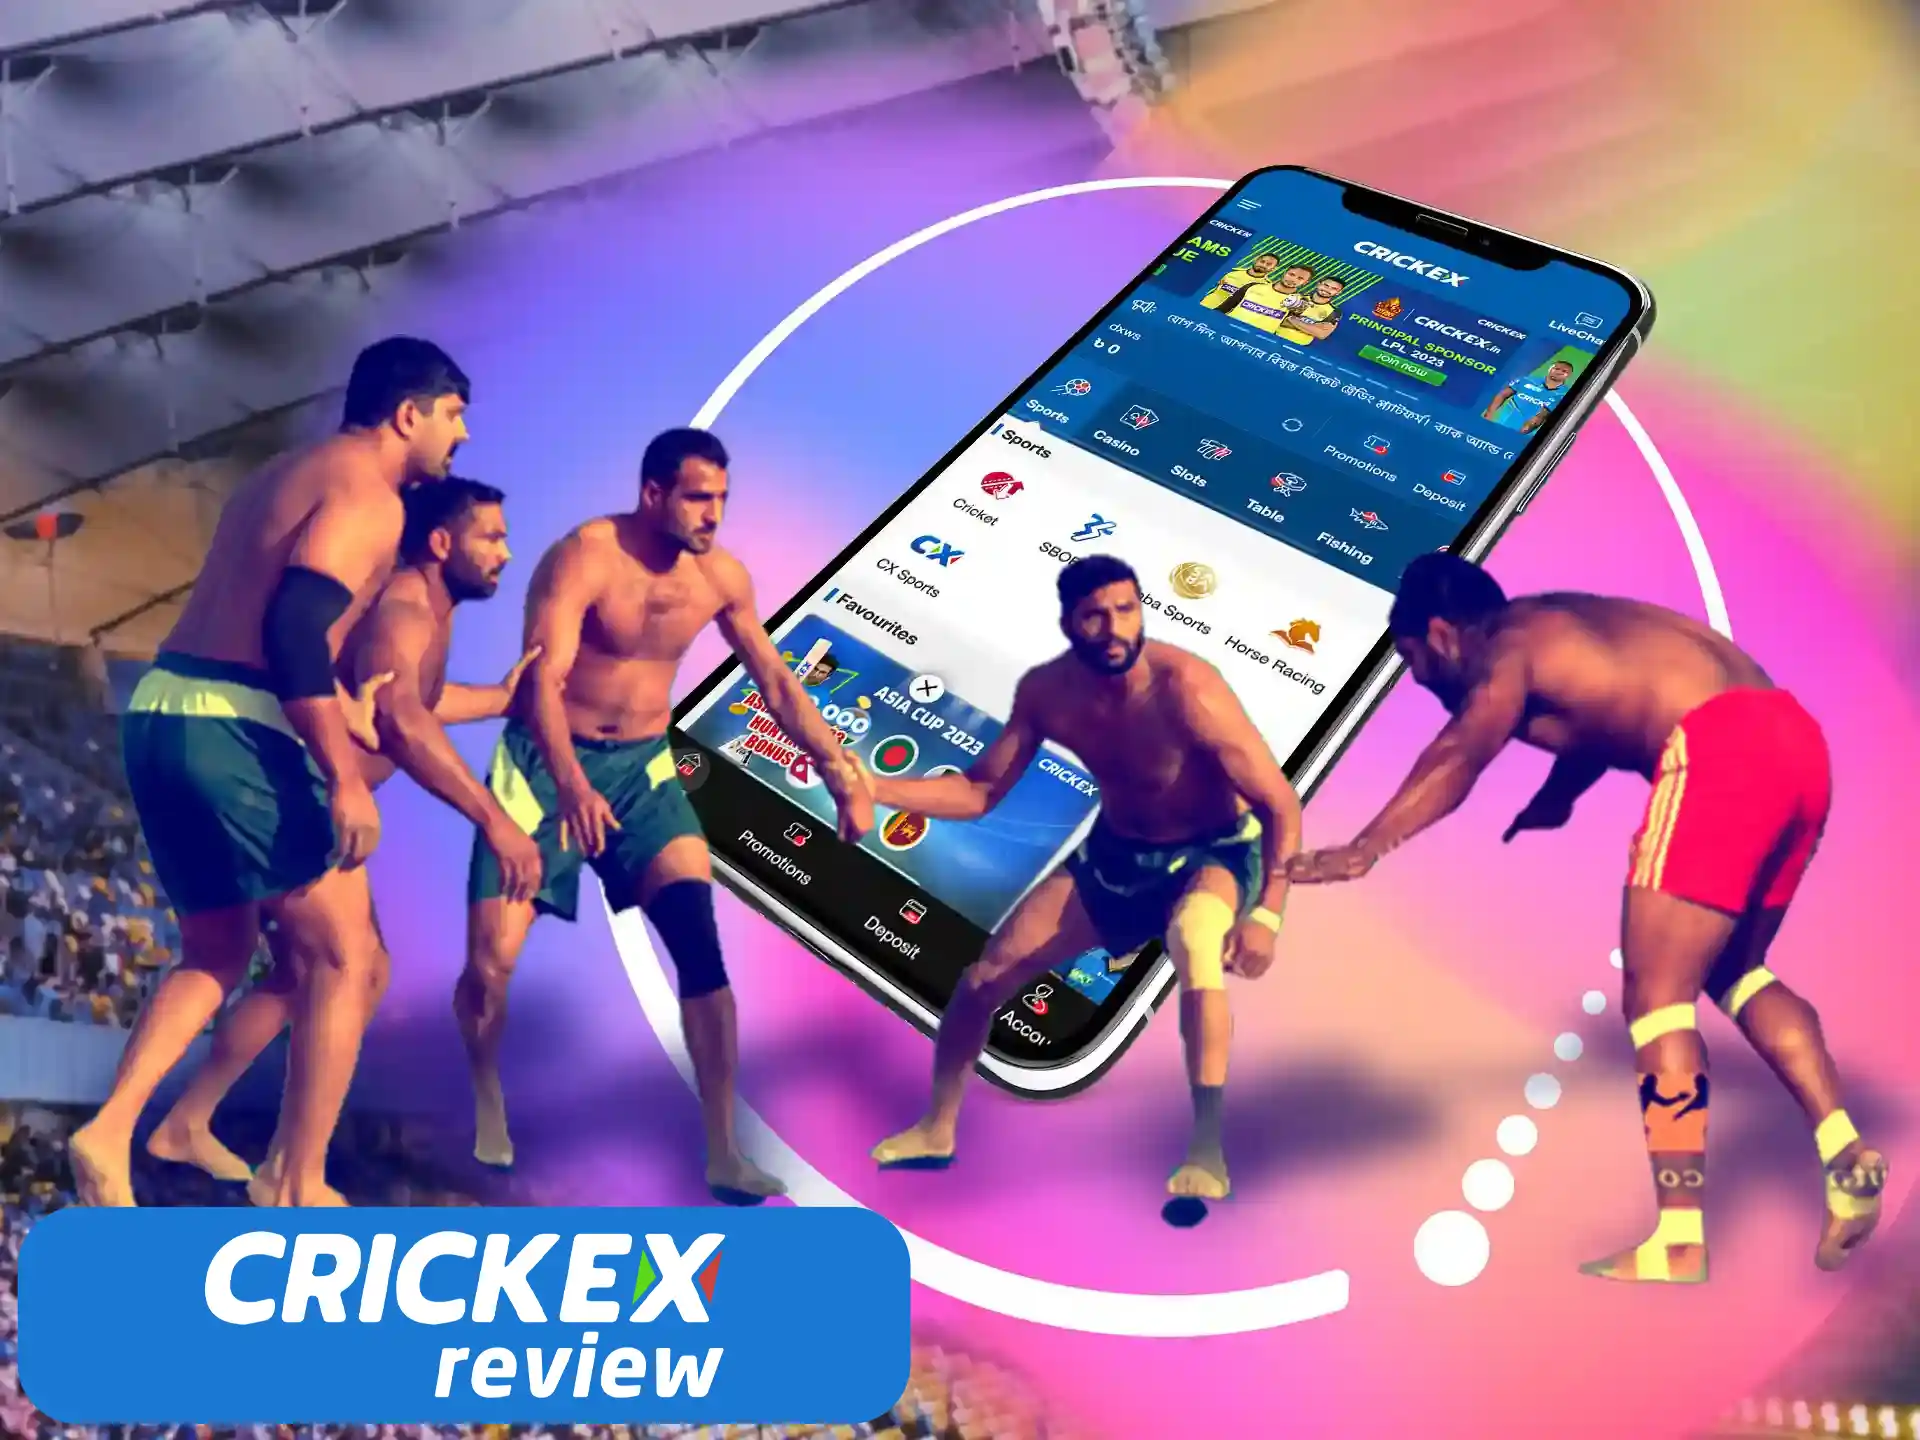 There are all the popular kabaddi leagues on the Crickex website.